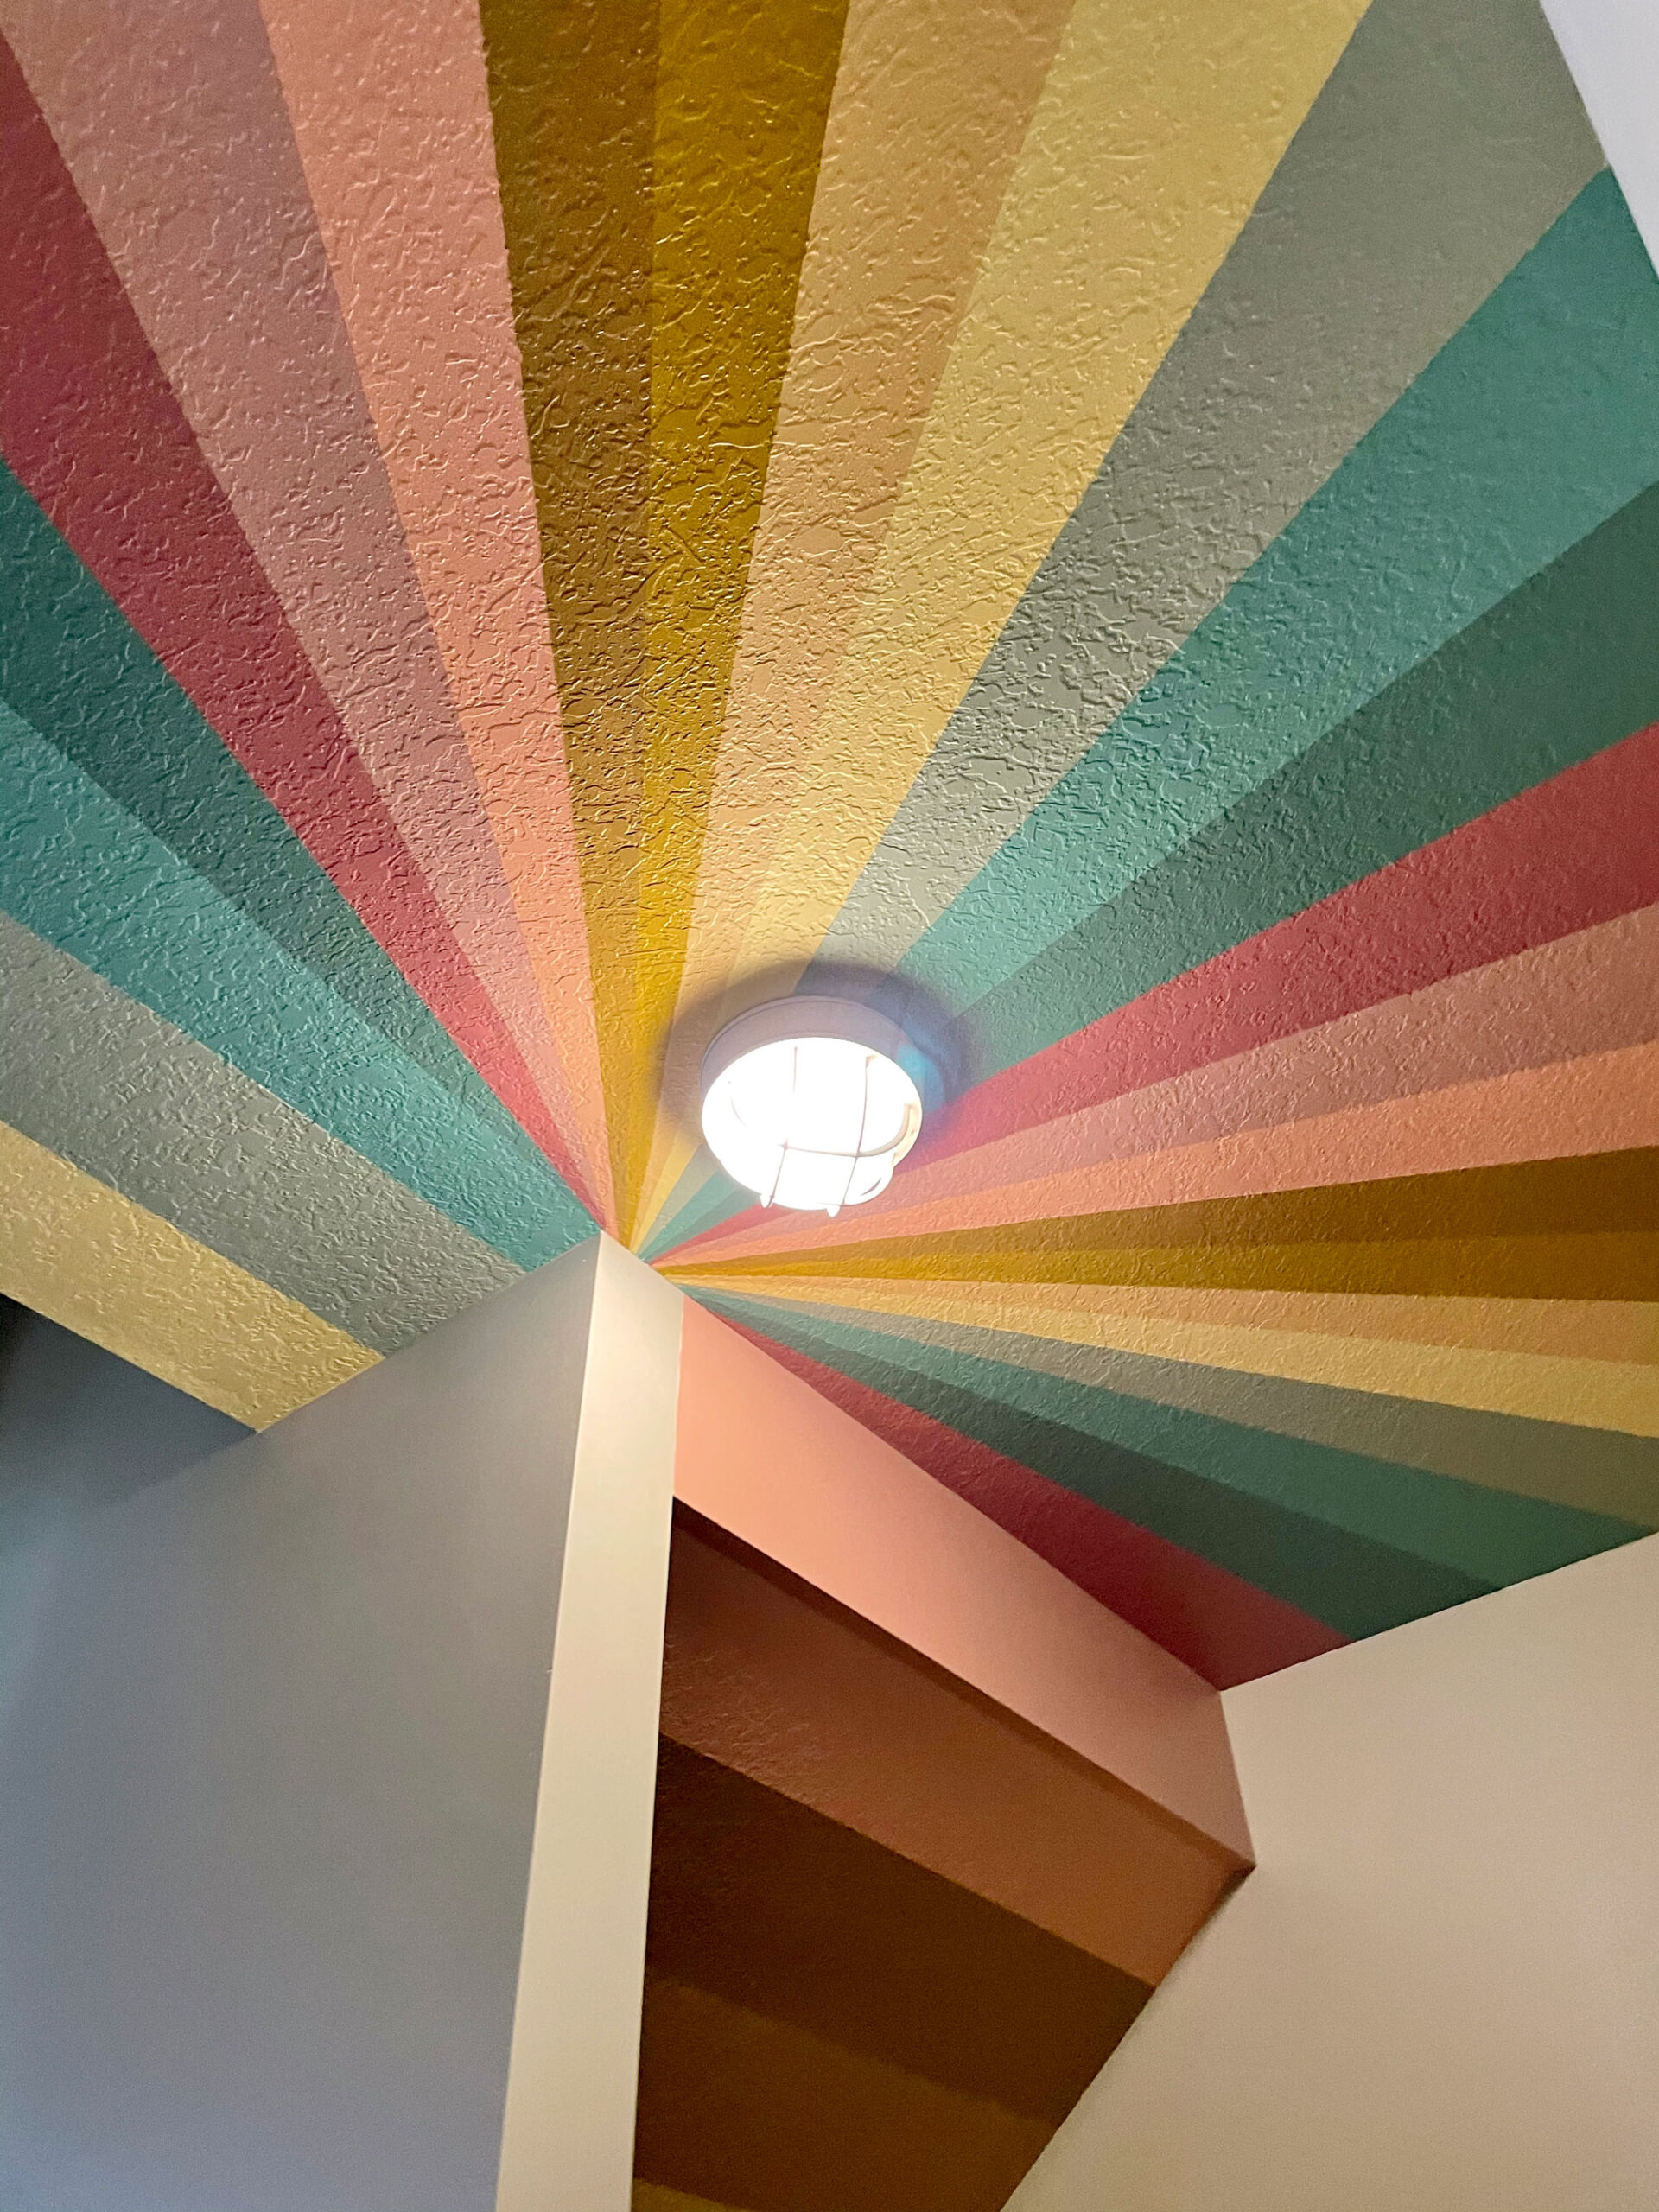 A colorful rainbow under the stairs secret clubhouse mural! :)